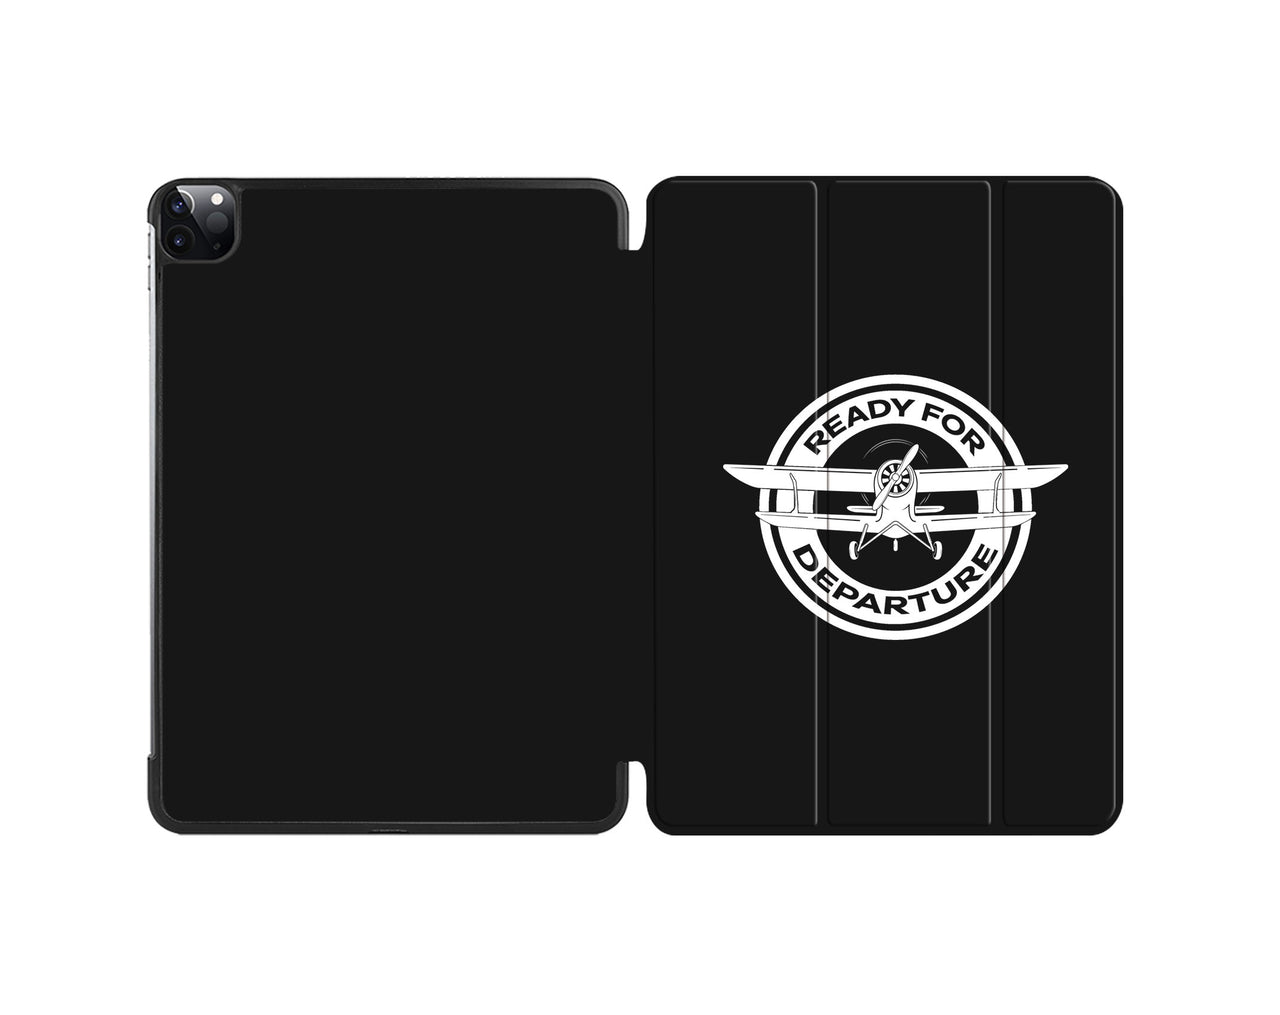 Ready for Departure Designed iPad Cases